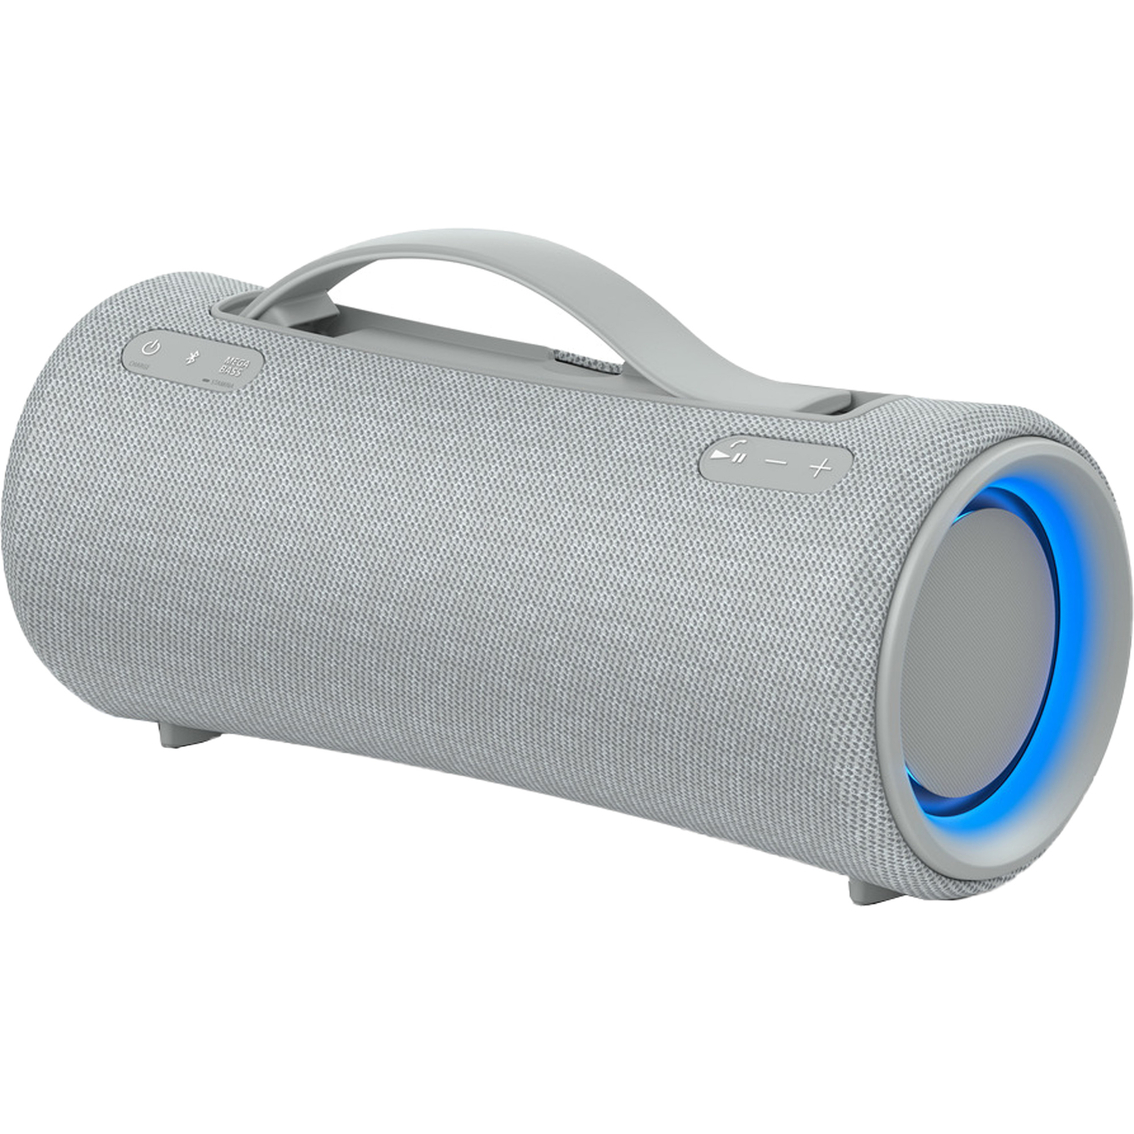 Sony SRSXG300 X-Series Portable Bluetooth Speakers - Image 2 of 3